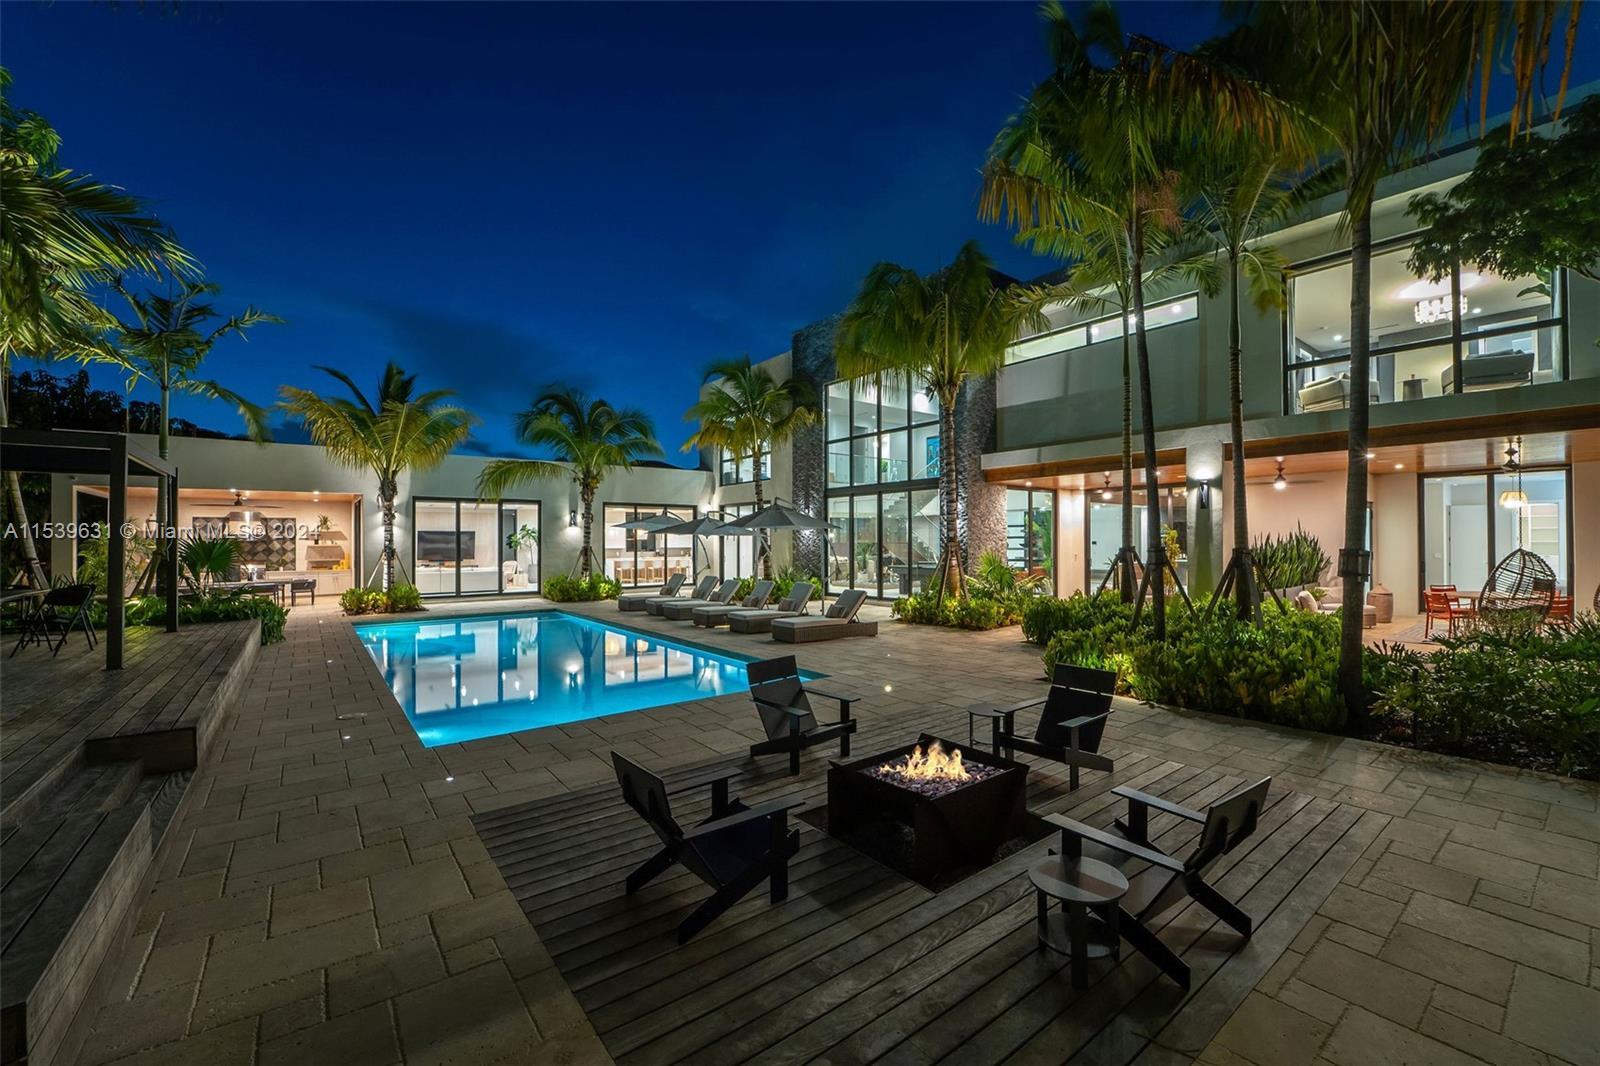 Tropical Modern Villa – A masterpiece set on one of the most prestigious roads in Pinecrest. A signi